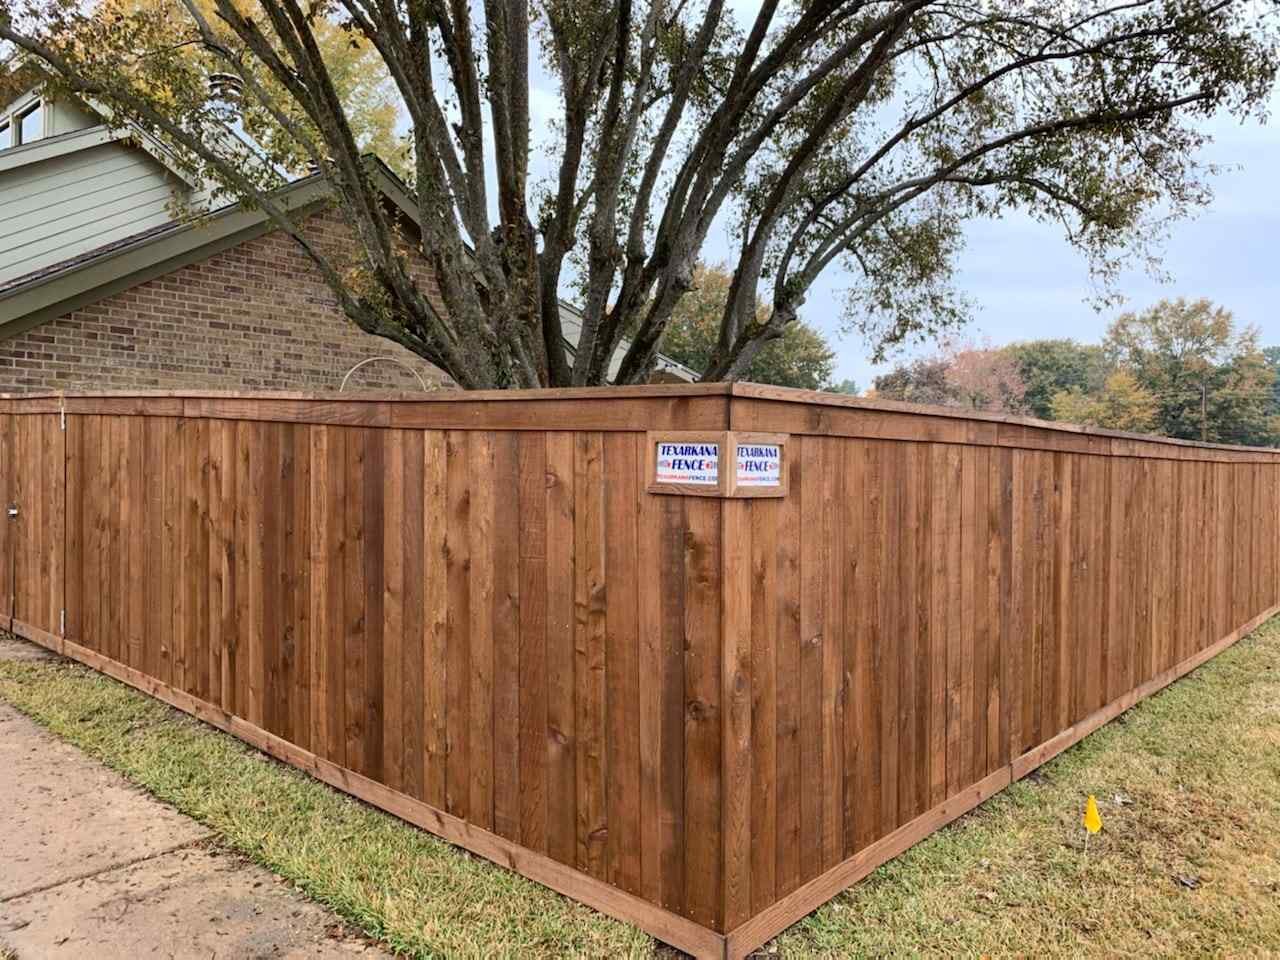 Photo of a residential pre-stained wood fence in Texarkana, Texas